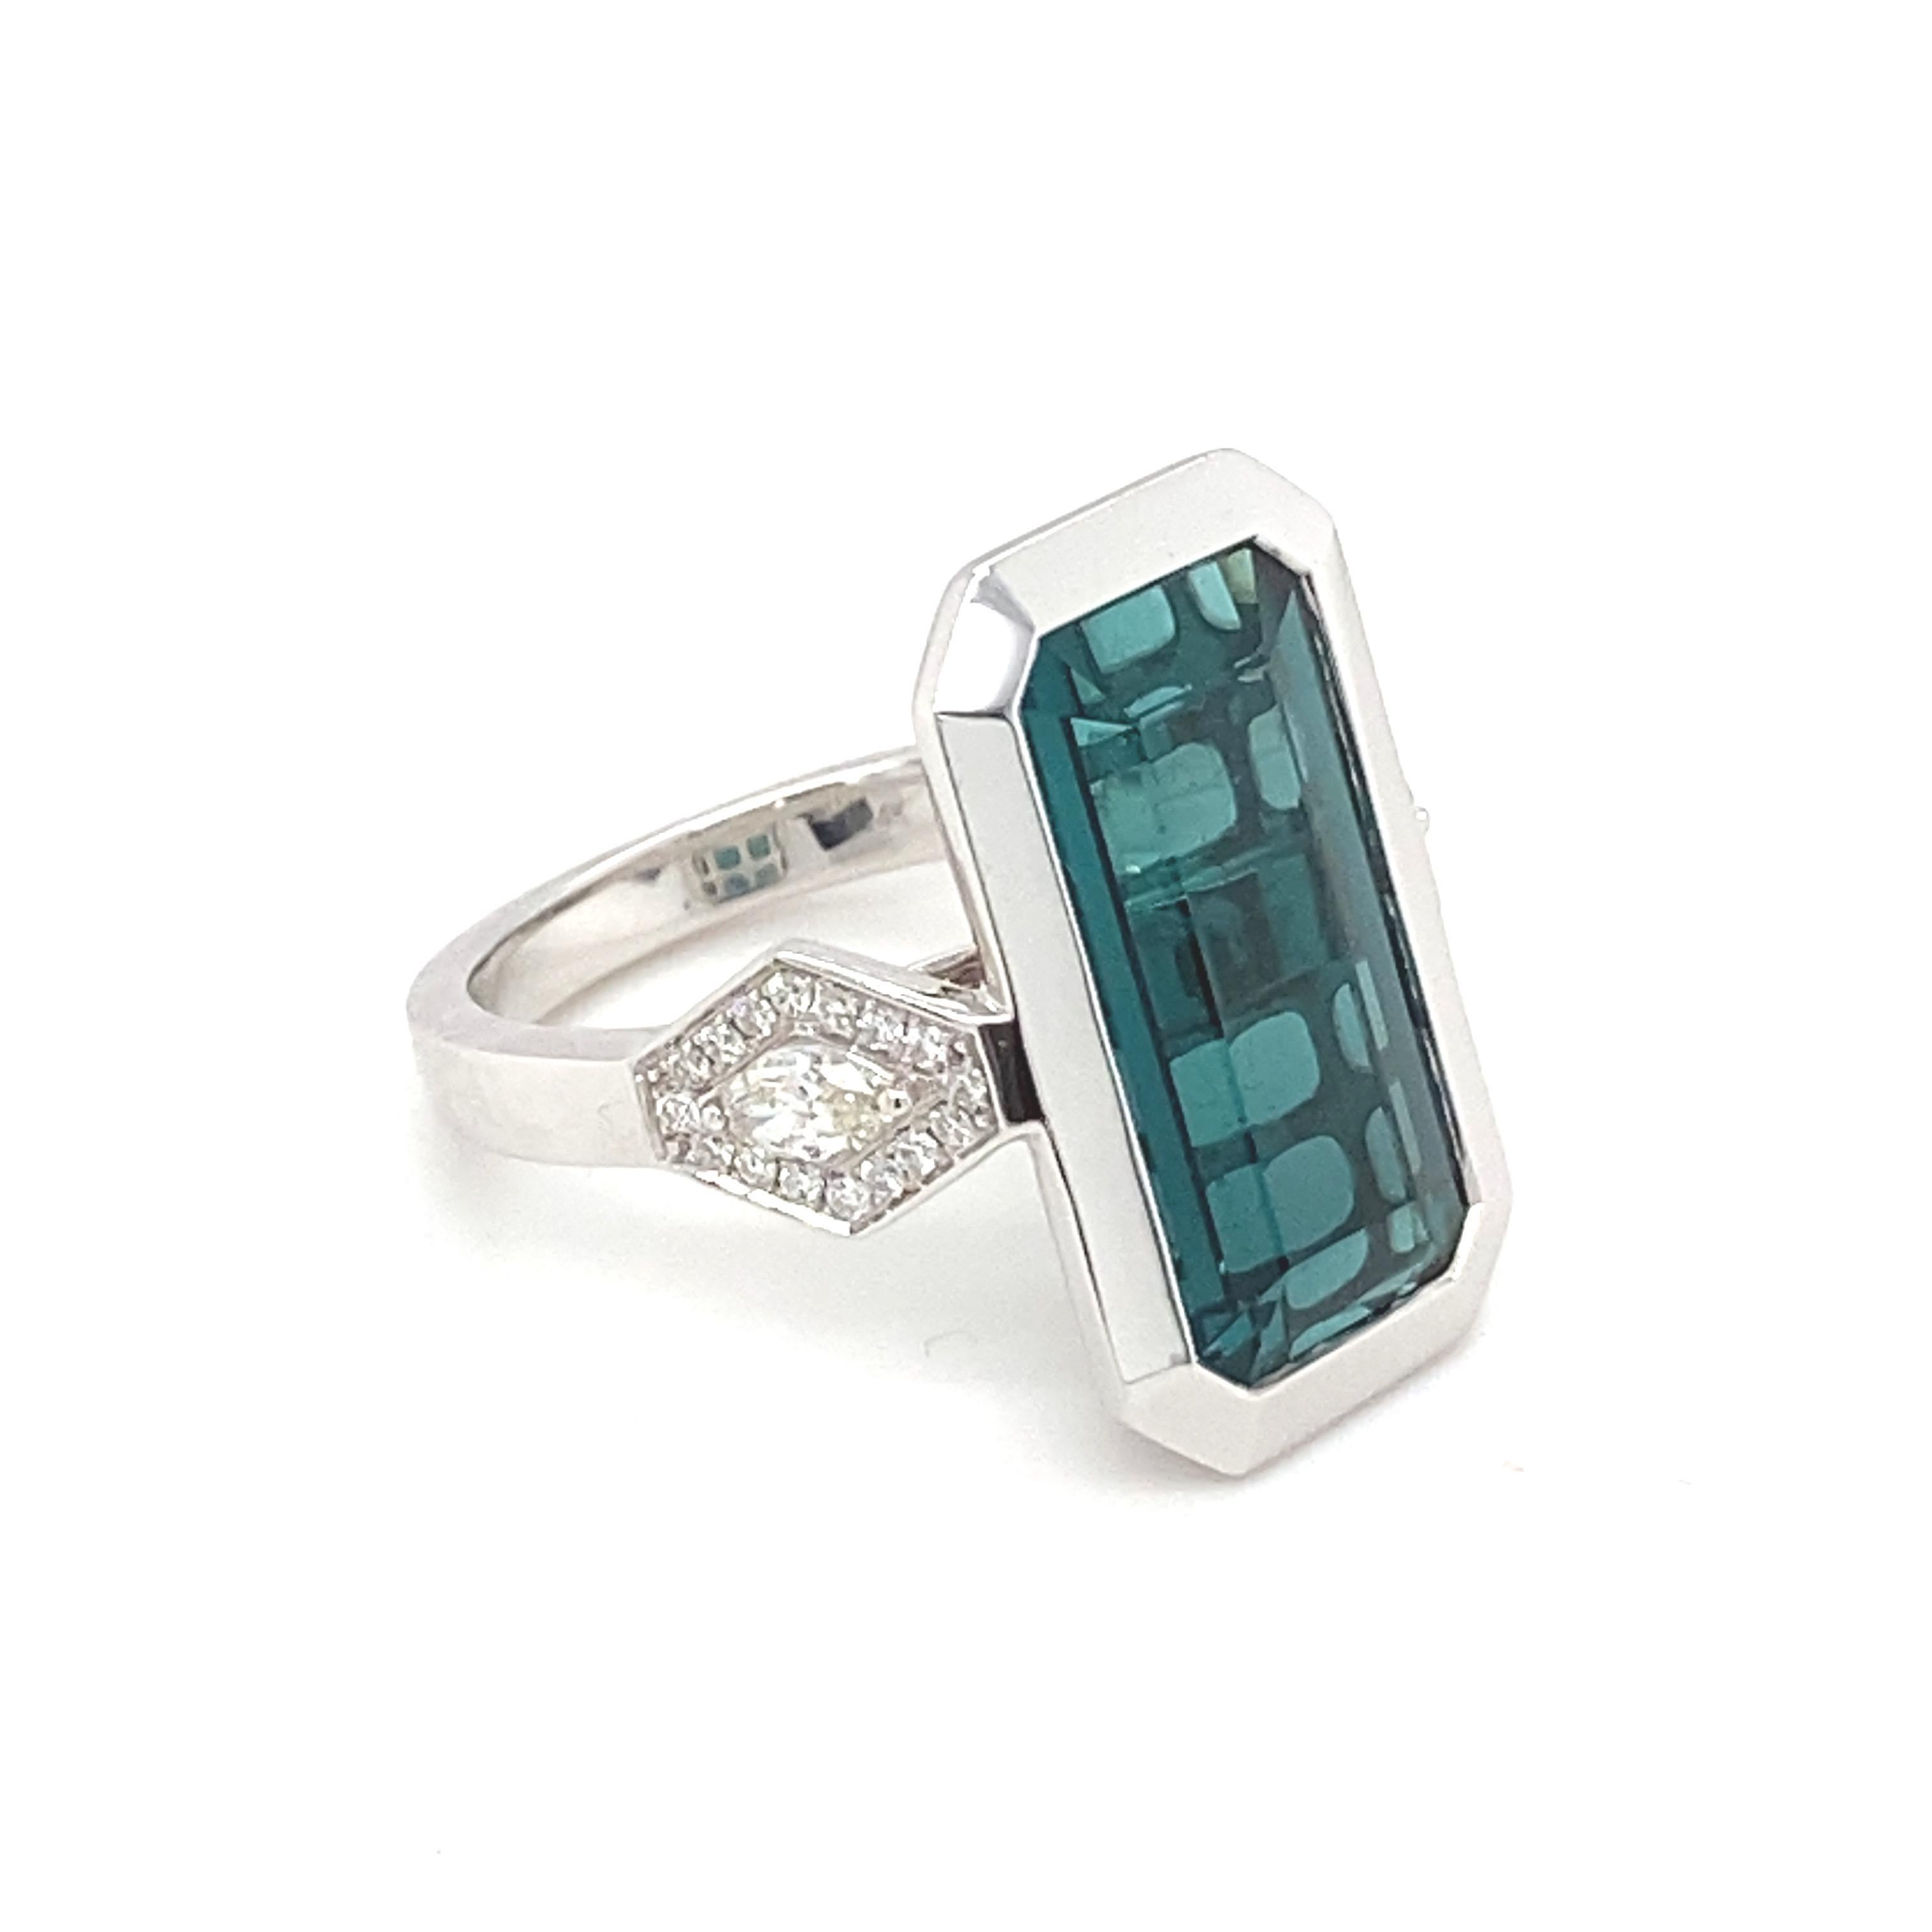 8.28 Carat Baguette Indicolite Tourmaline Diamond White Gold Cocktail Ring In New Condition For Sale In Trumbull, CT